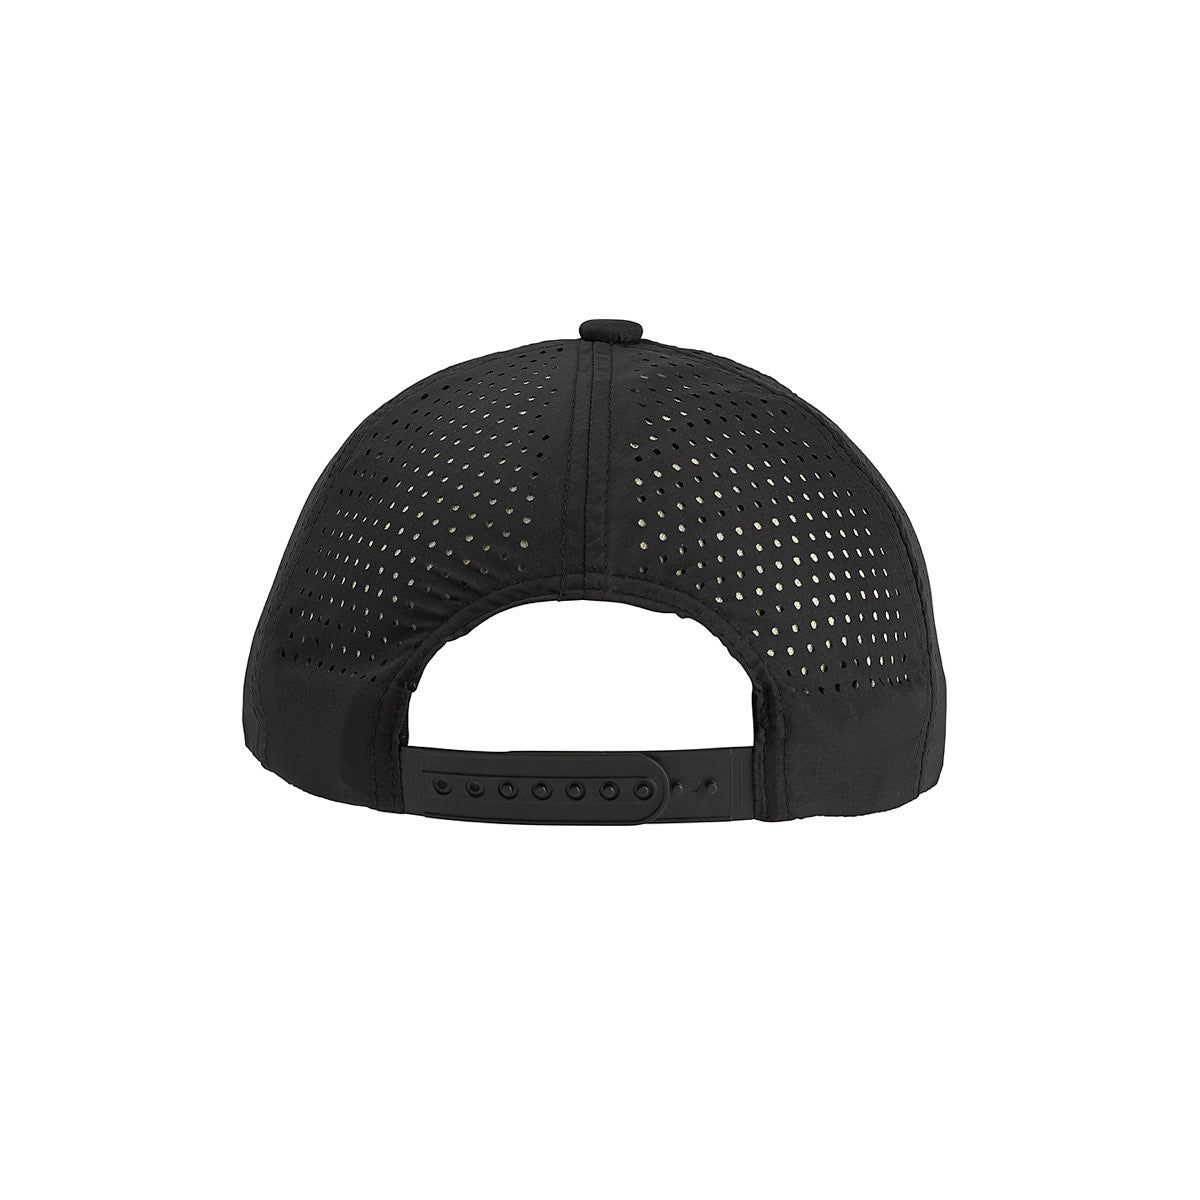 CLASSIC PERFORMANCE SNAPBACK XXL - BLACKED OUT - Rear View